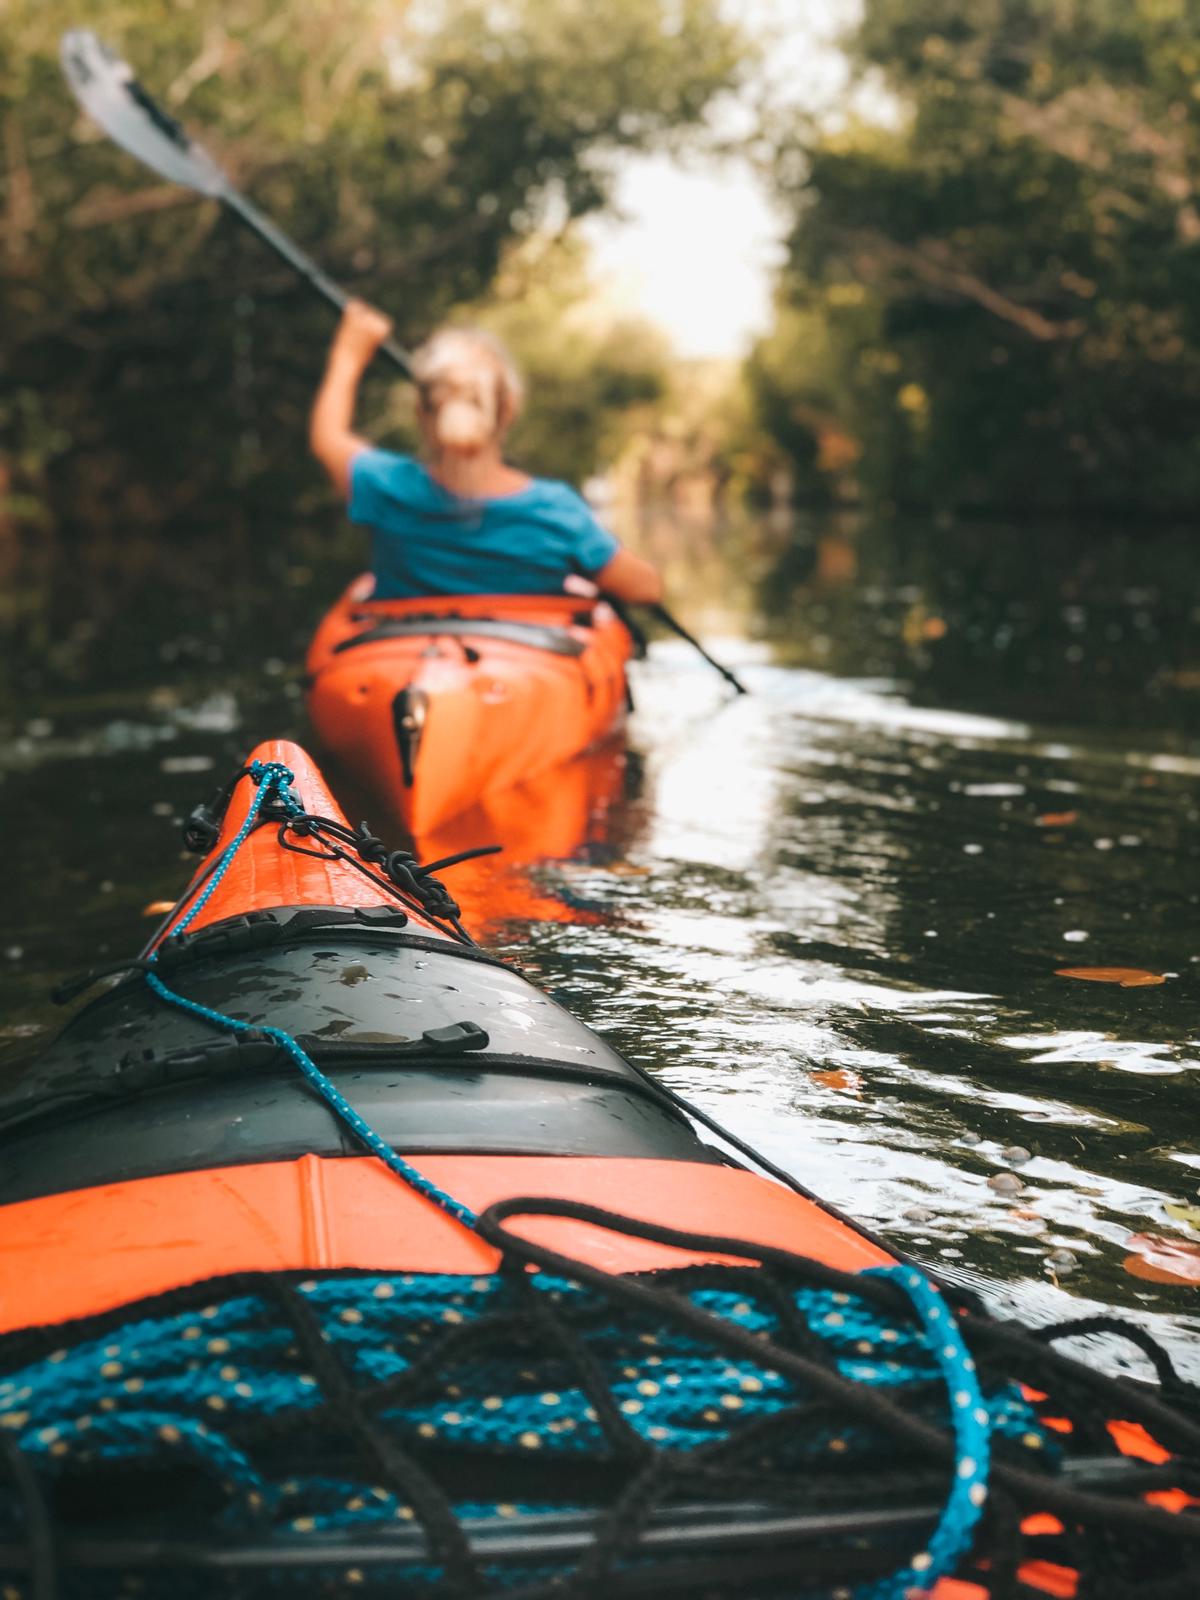 A person kayaking with a GoPro camera mounted on their kayak, capturing stunning footage.